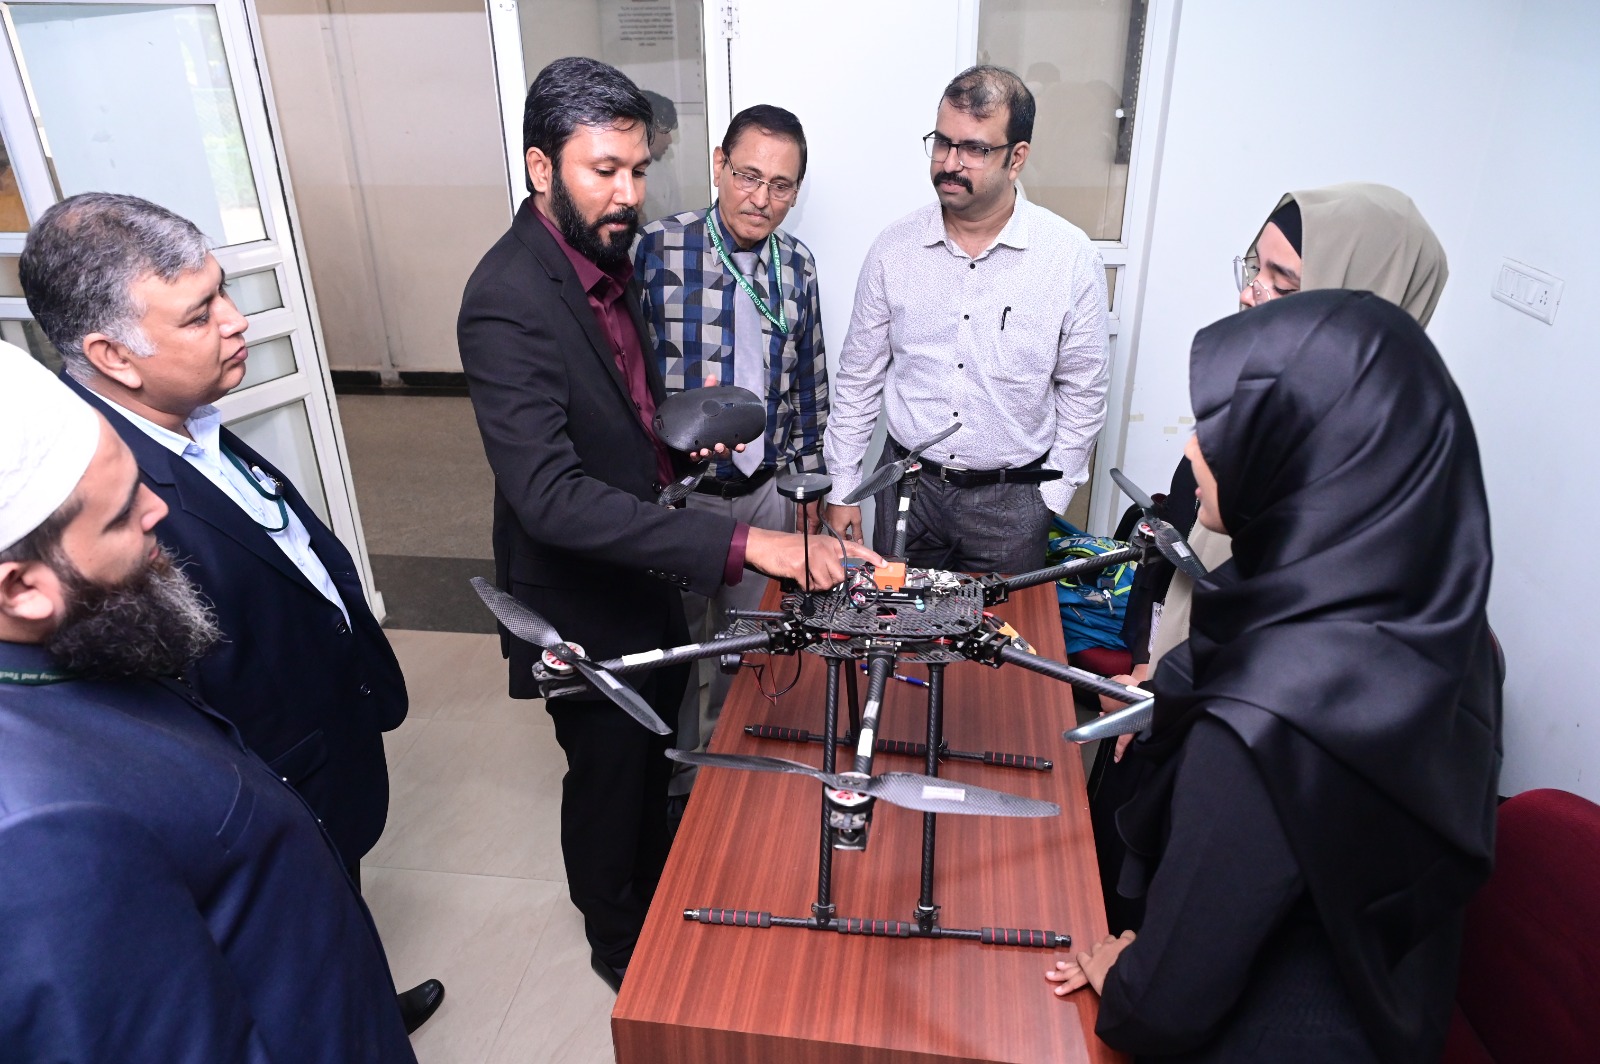 The idea of “3D Mapping using LiDAR drone” that was approved by MSME for a funding of Rs. 15,00,000/- was well appreciated by the chief guest who invited the students to visit his company and assured any help that the students may need with respect to drone technology.